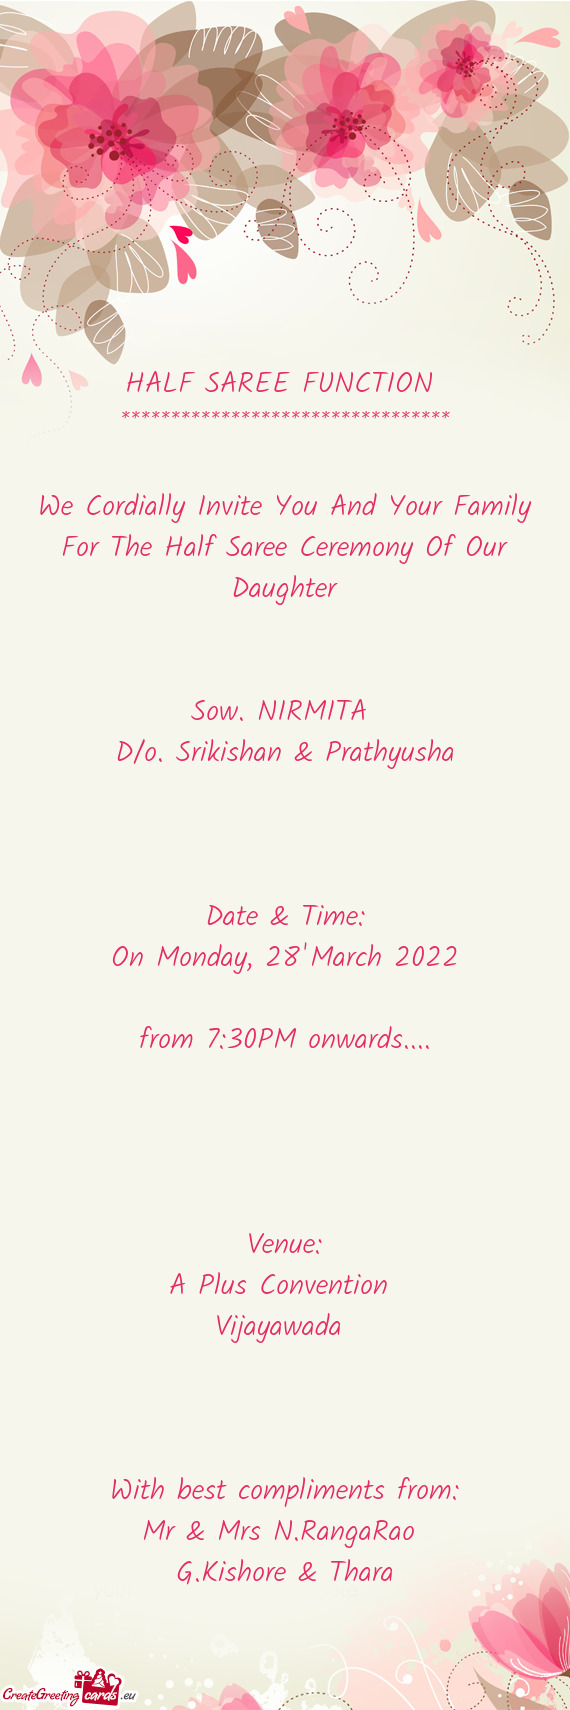 We Cordially Invite You And Your Family For The Half Saree Ceremony Of Our Daughter